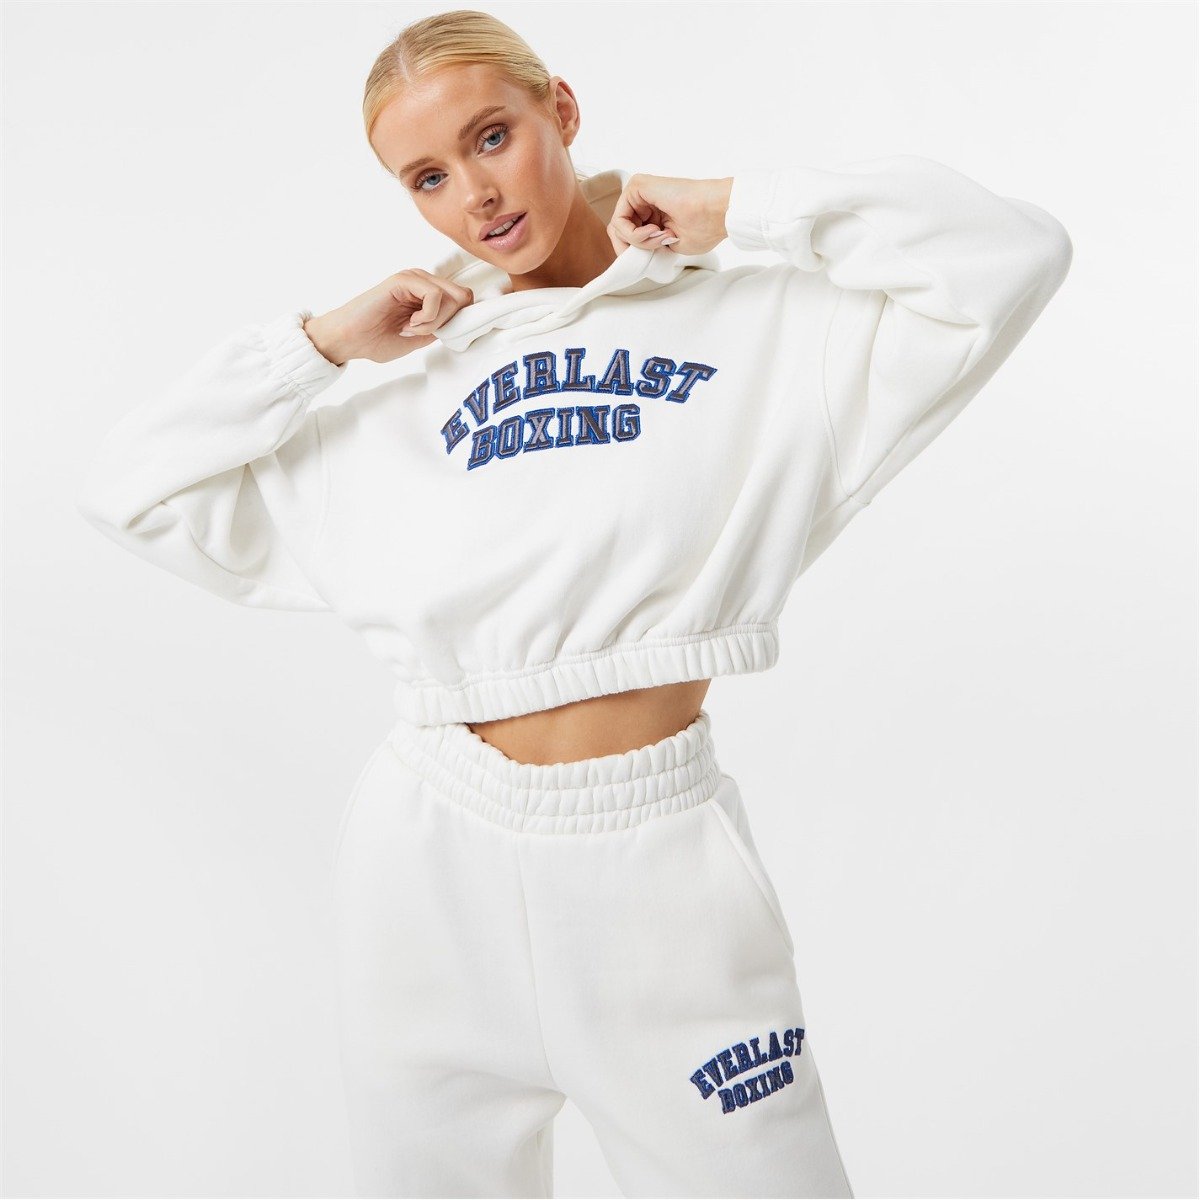 Womens Boxing Cropped Hoodie – Everlast